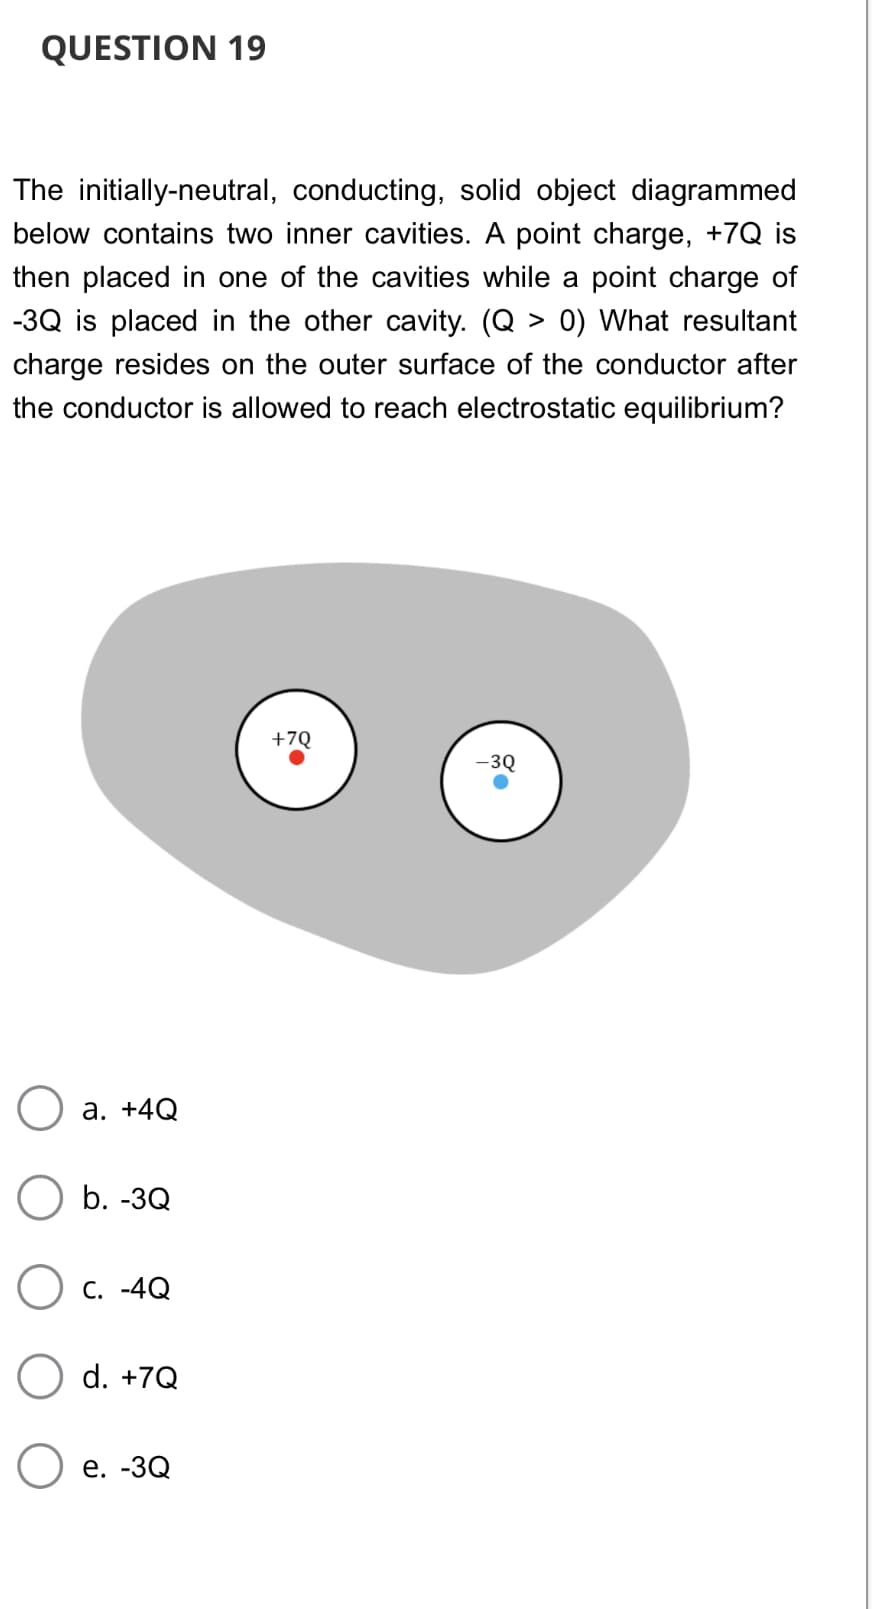 QUESTION 19
The initially-neutral, conducting, solid object diagrammed
below contains two inner cavities. A point charge, +7Q is
then placed in one of the cavities while a point charge of
-3Q is placed in the other cavity. (Q > 0) What resultant
charge resides on the outer surface of the conductor after
the conductor is allowed to reach electrostatic equilibrium?
+7Q
-3Q
а. +4Q
b. -3Q
Ос. -4
d. +7Q
е. -3Q
